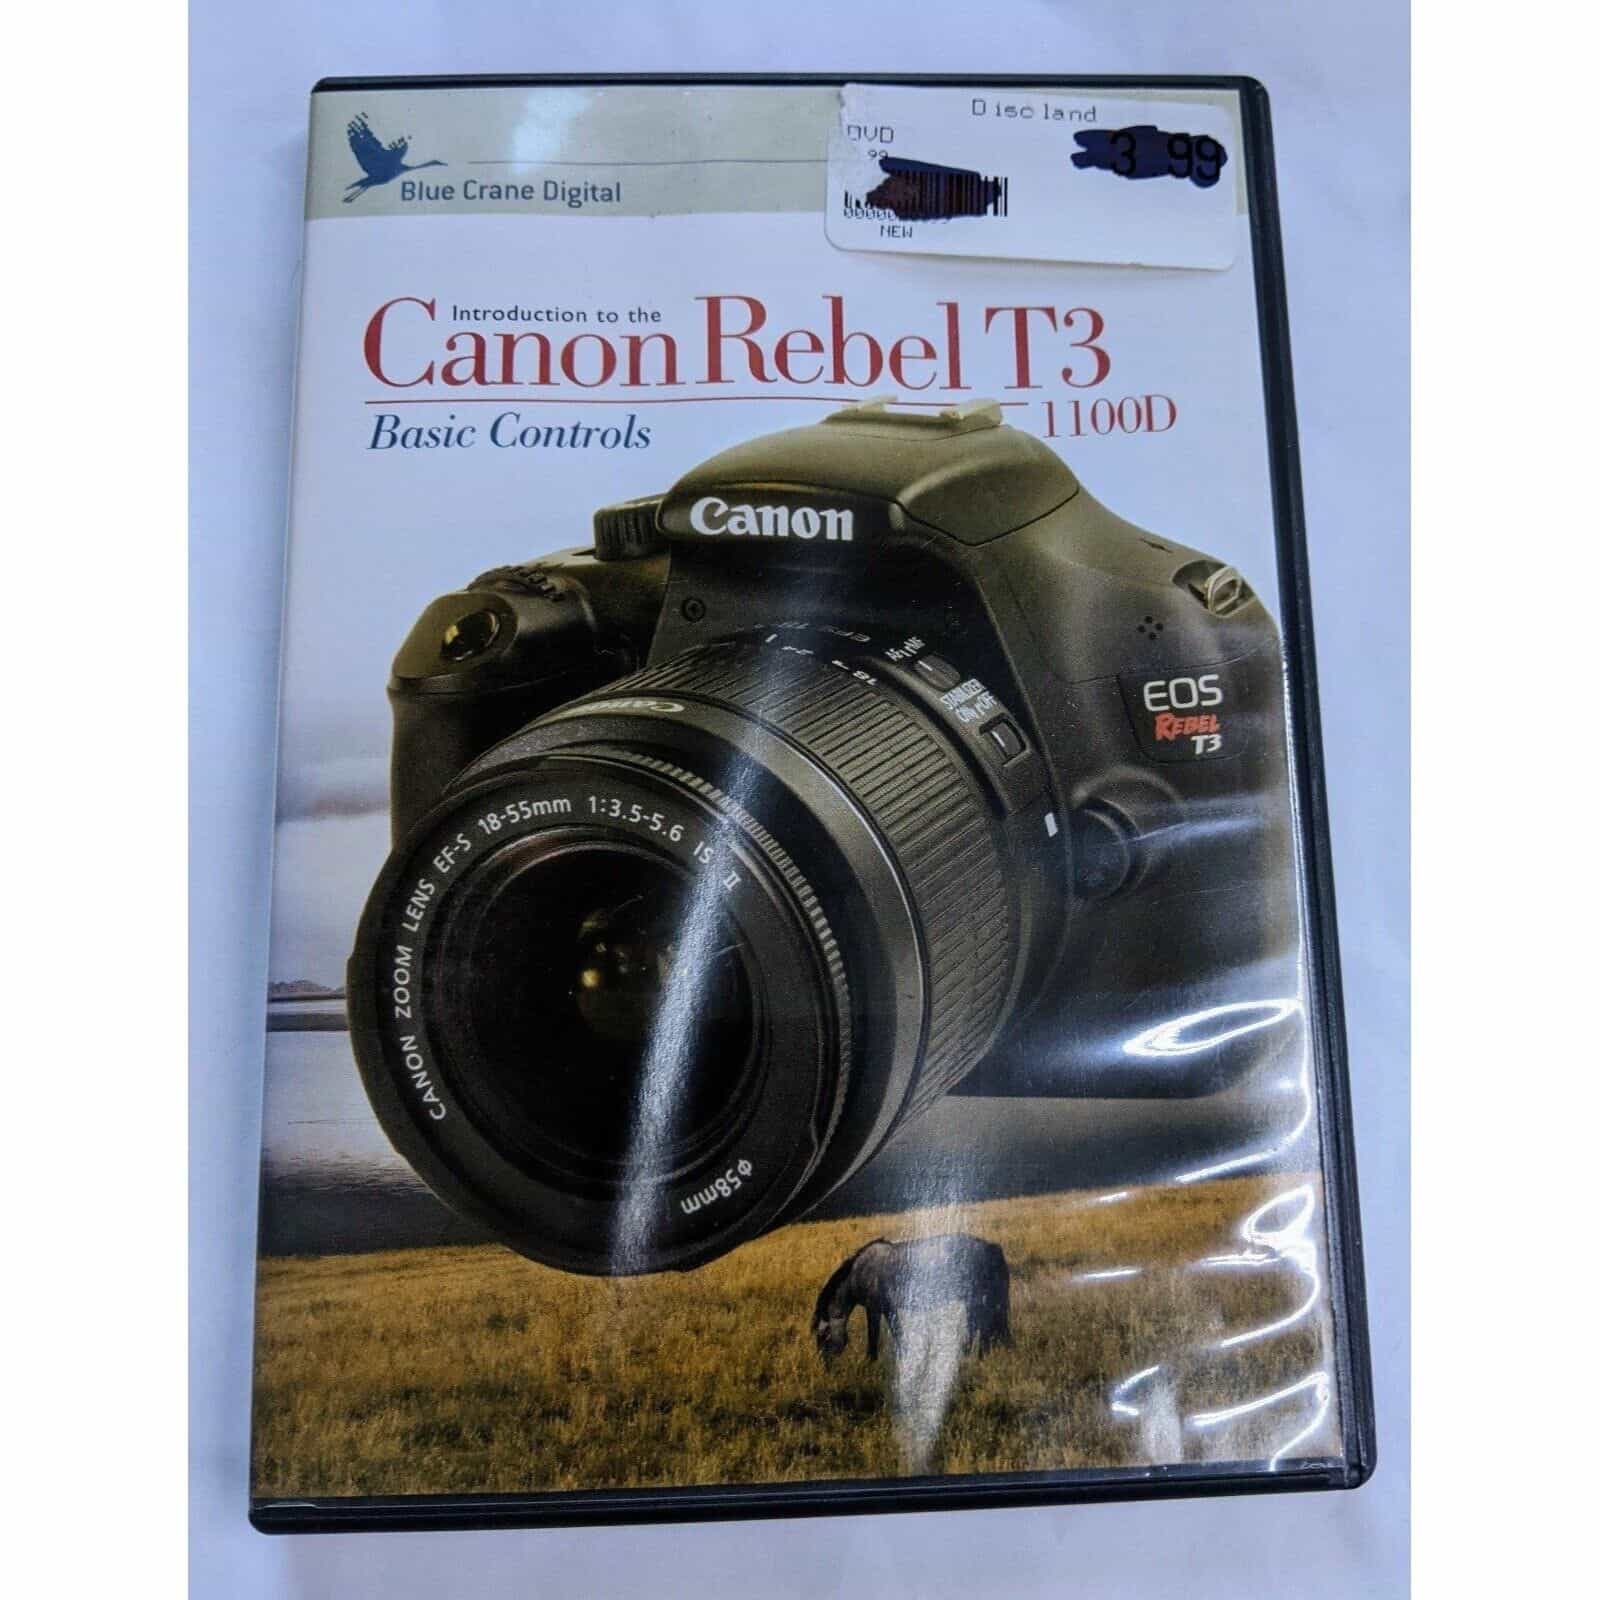 Introduction to the Canon Rebel T3 1100D Basic Controls DVD